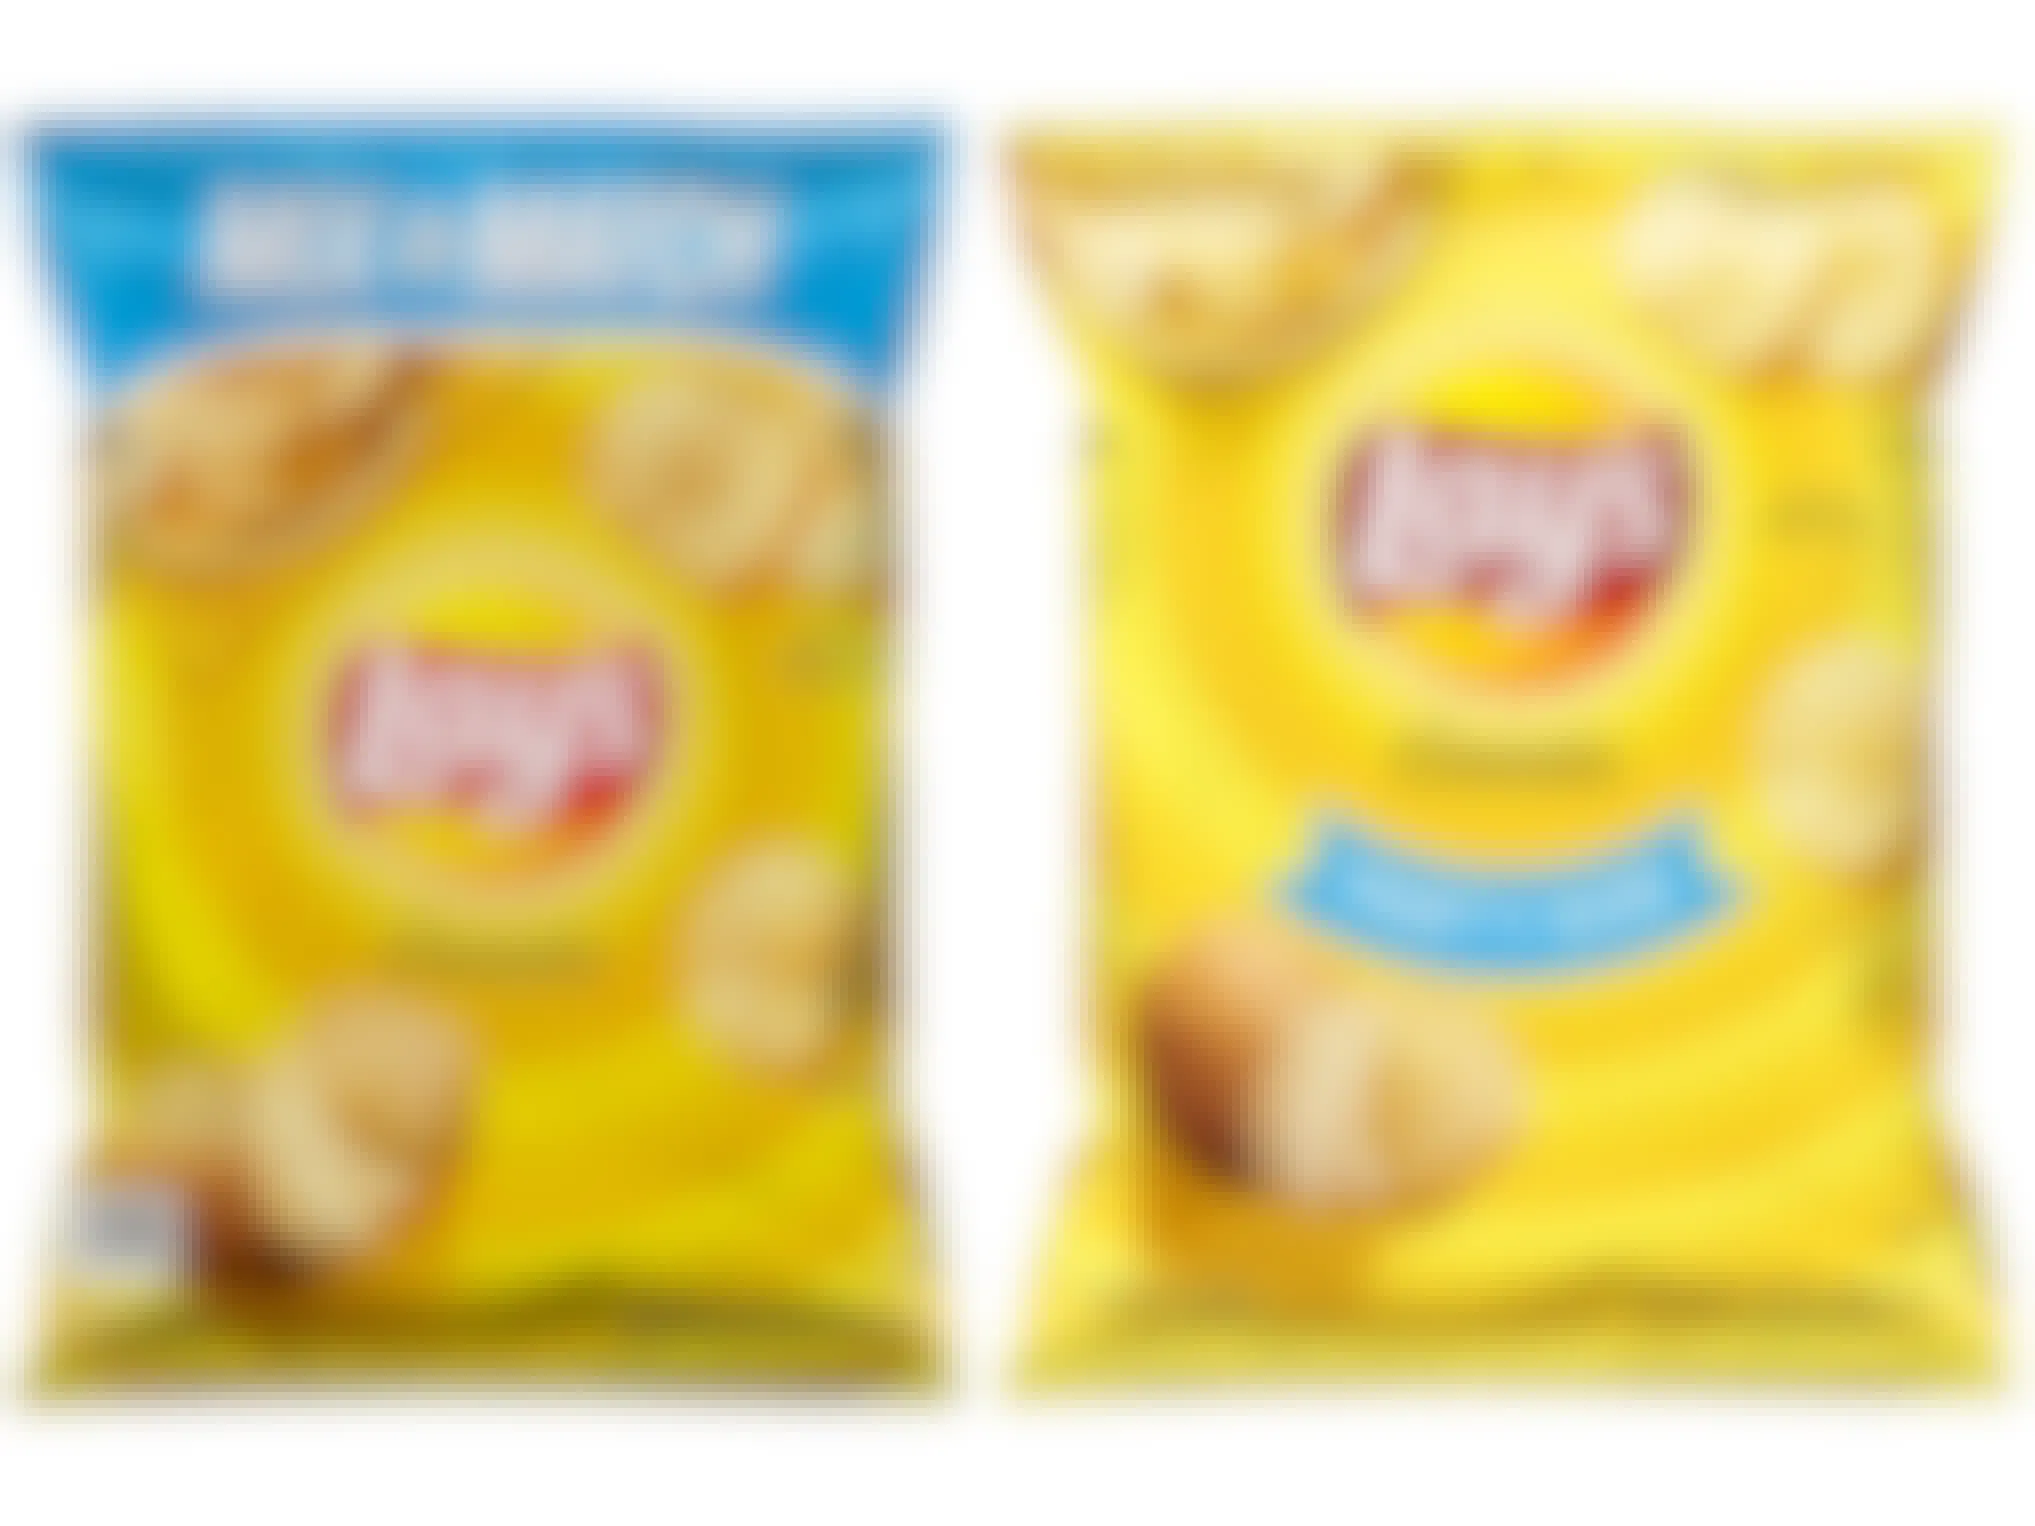 lays classic and mix and match potato chip bags side by side